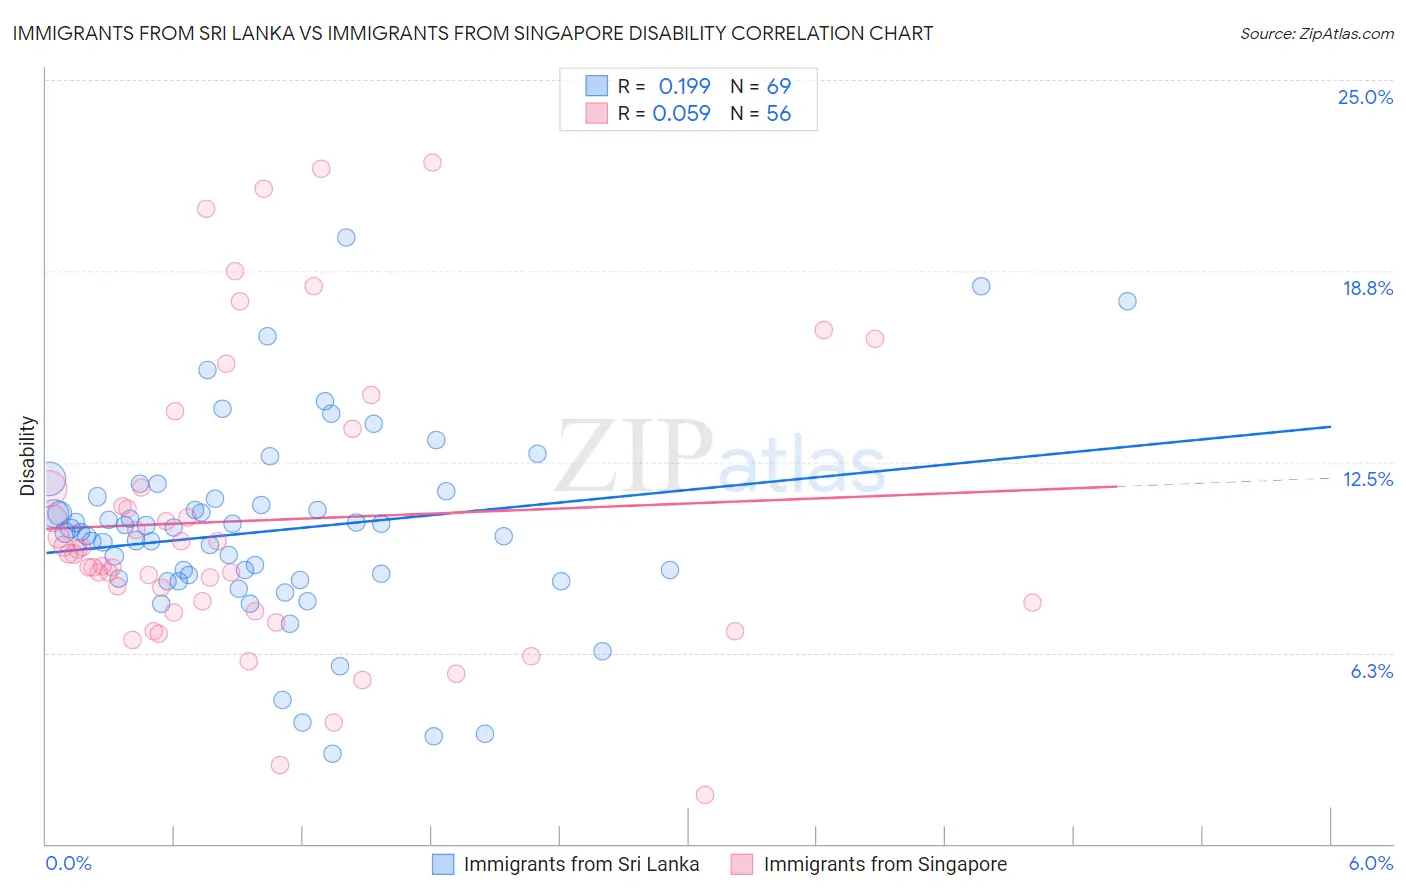 Immigrants from Sri Lanka vs Immigrants from Singapore Disability